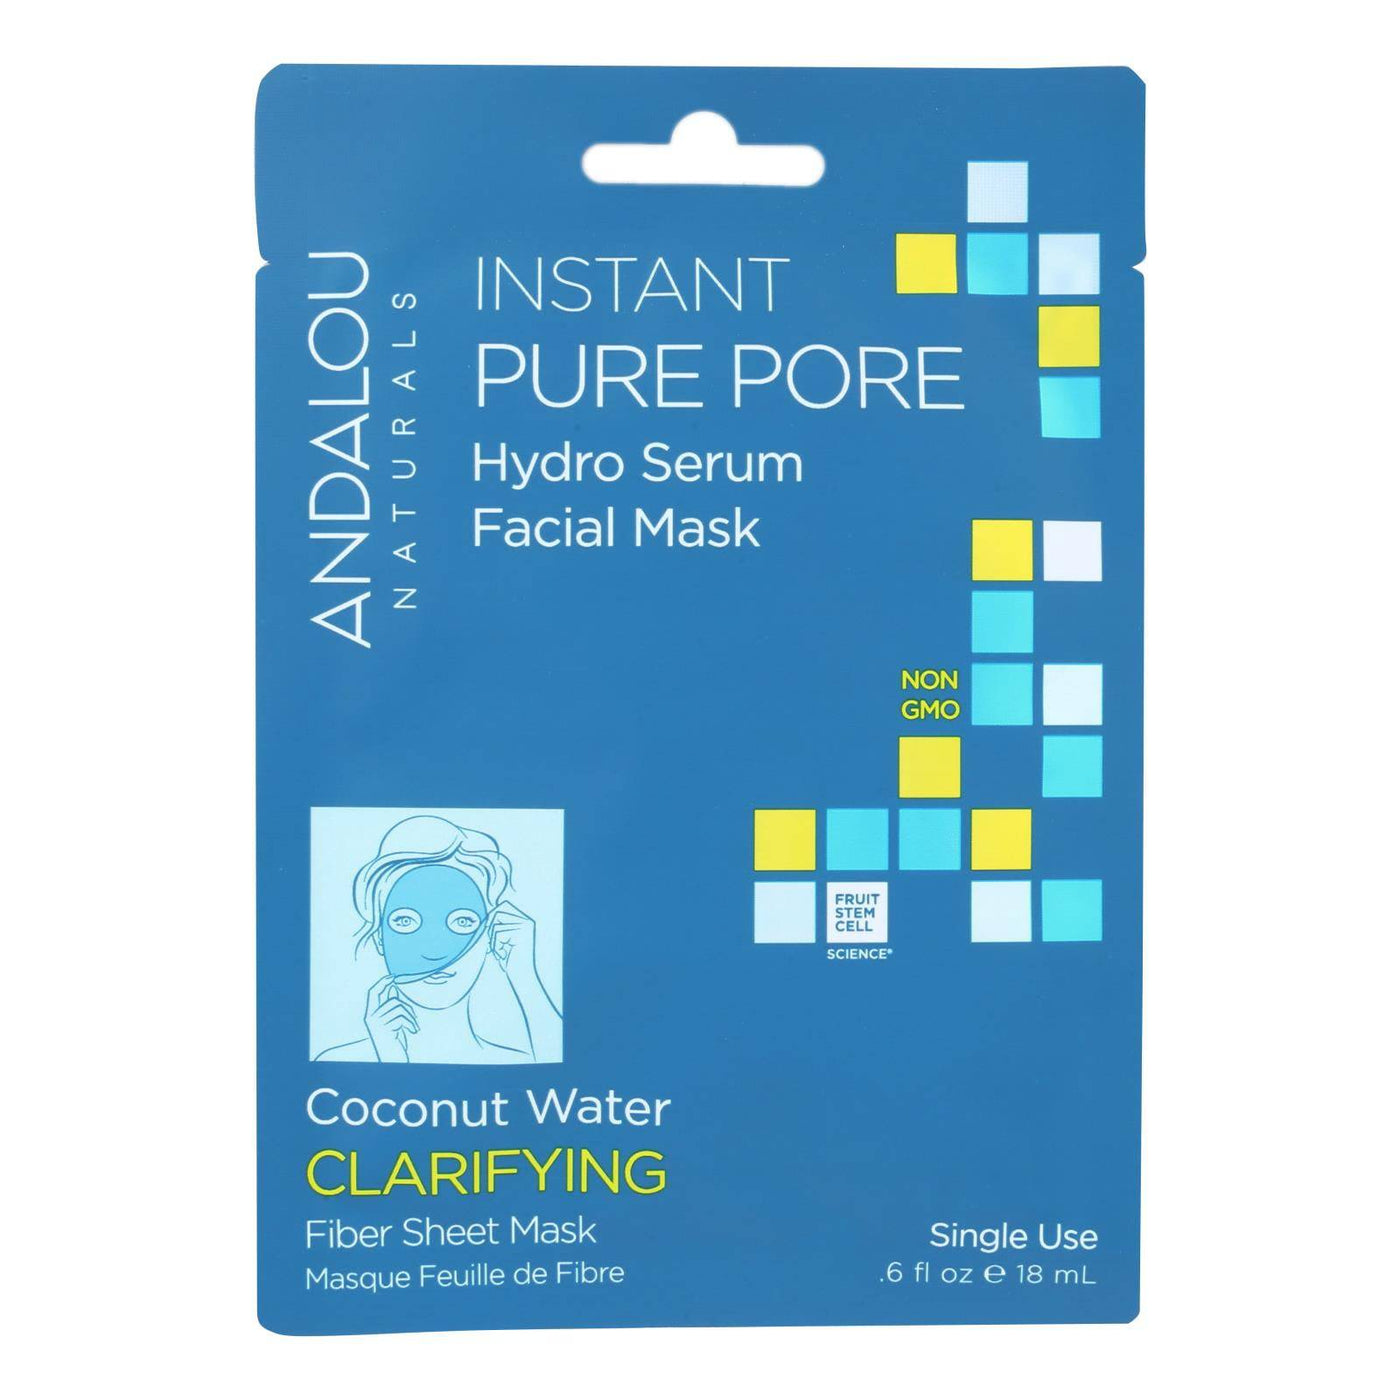 Andalou Naturals Instant Pure Pore Facial Mask - Coconut Water Clarifying - Case Of 6 - 0.6 Fl Oz | OnlyNaturals.us